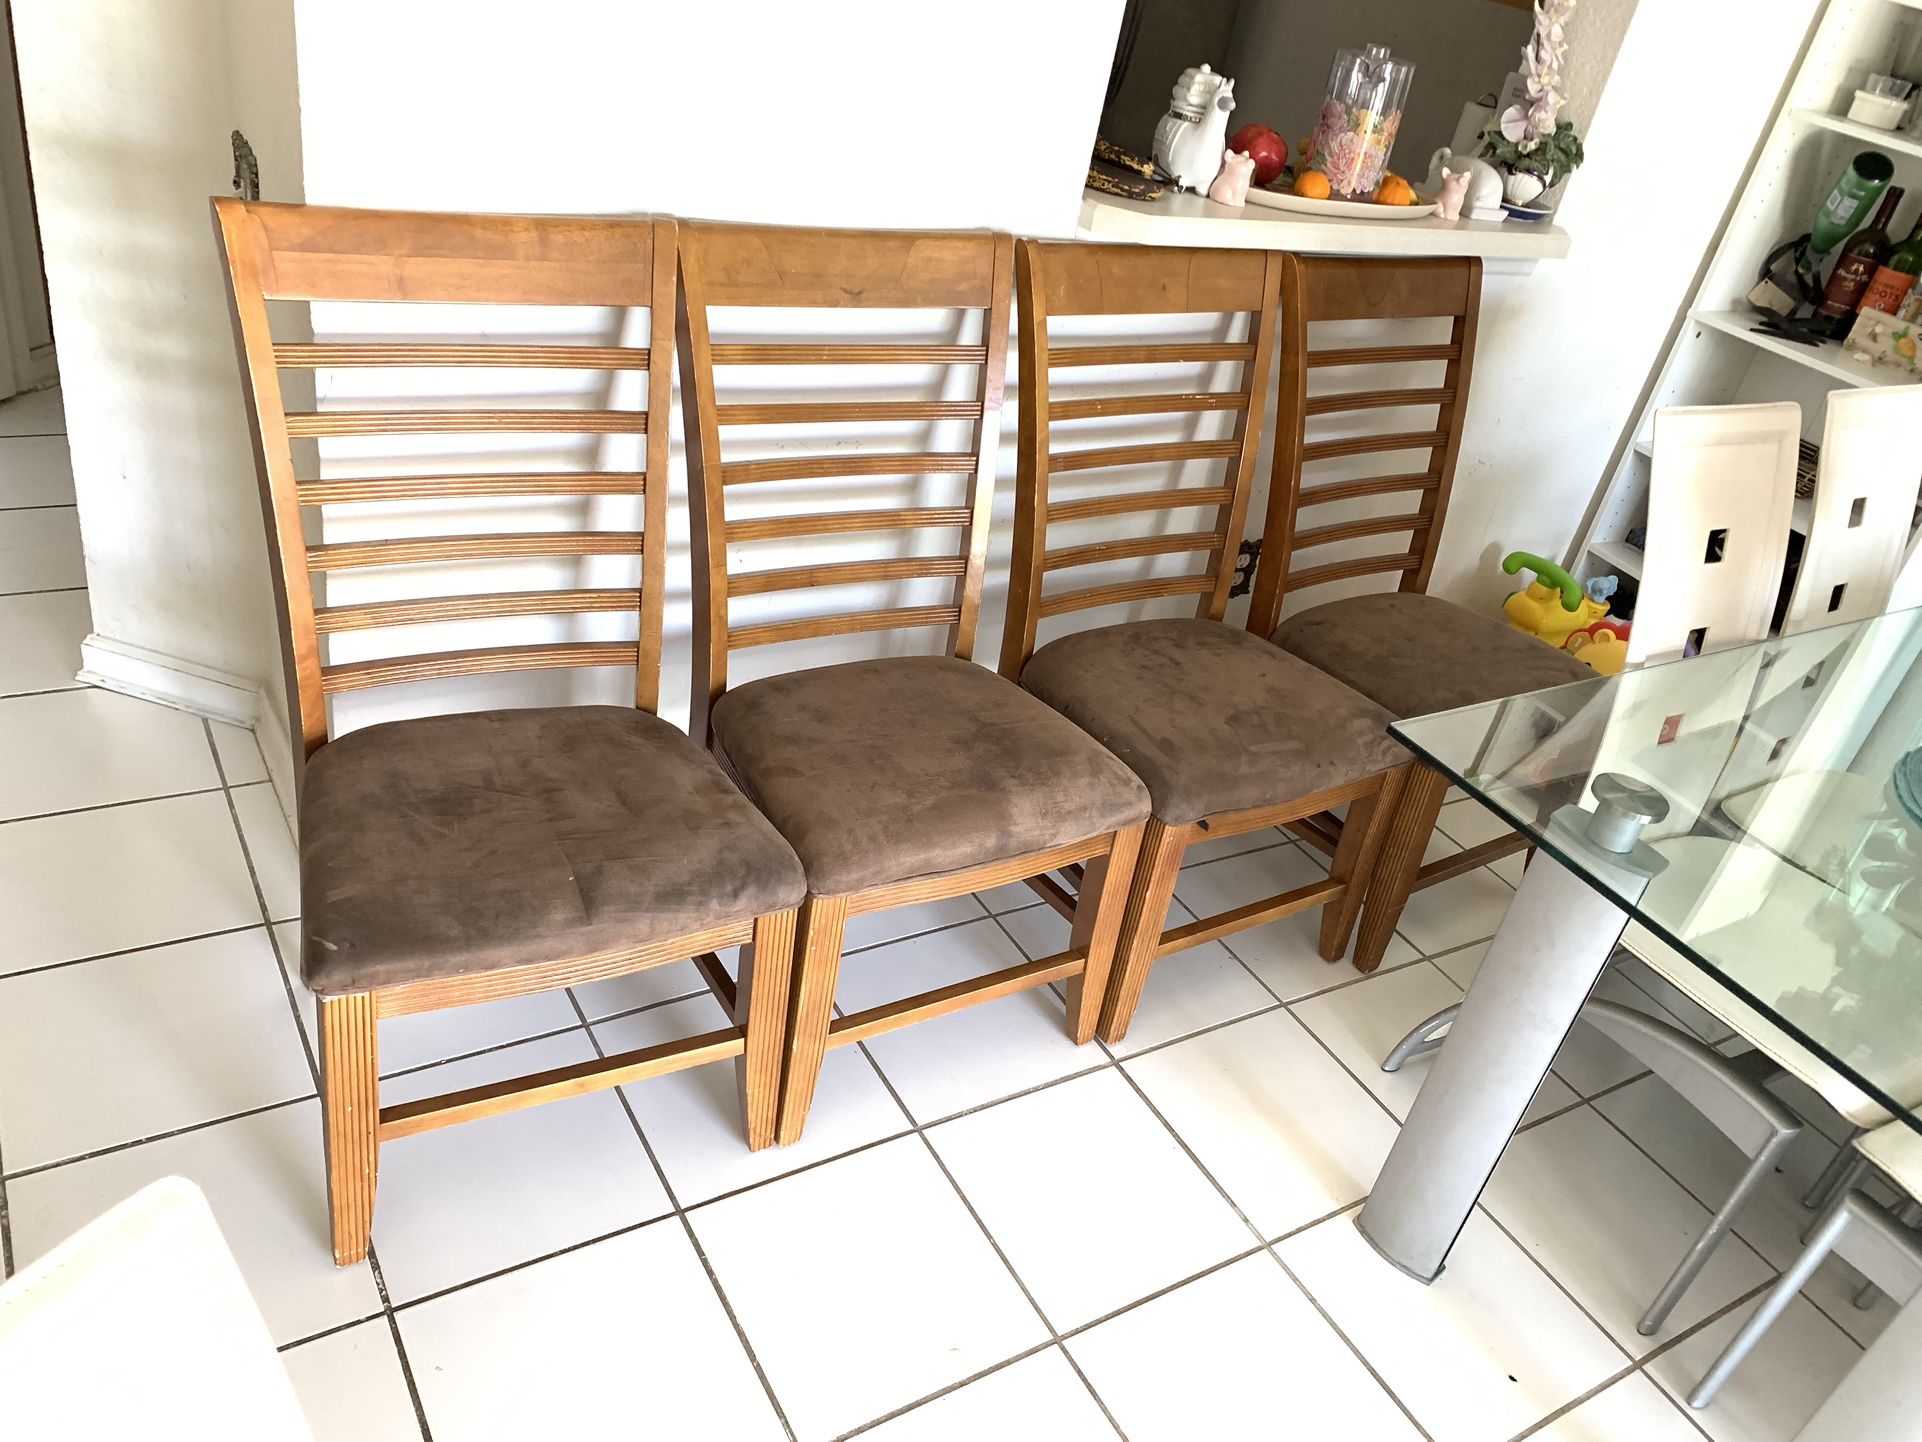 Table And Chairs $169 For All🎁🚚🎄🎈🍀 Delivery, Furniture, Wood Furniture, House Furniture, Kitchen And Dining Furniture, Item, Breakfast Furniture.